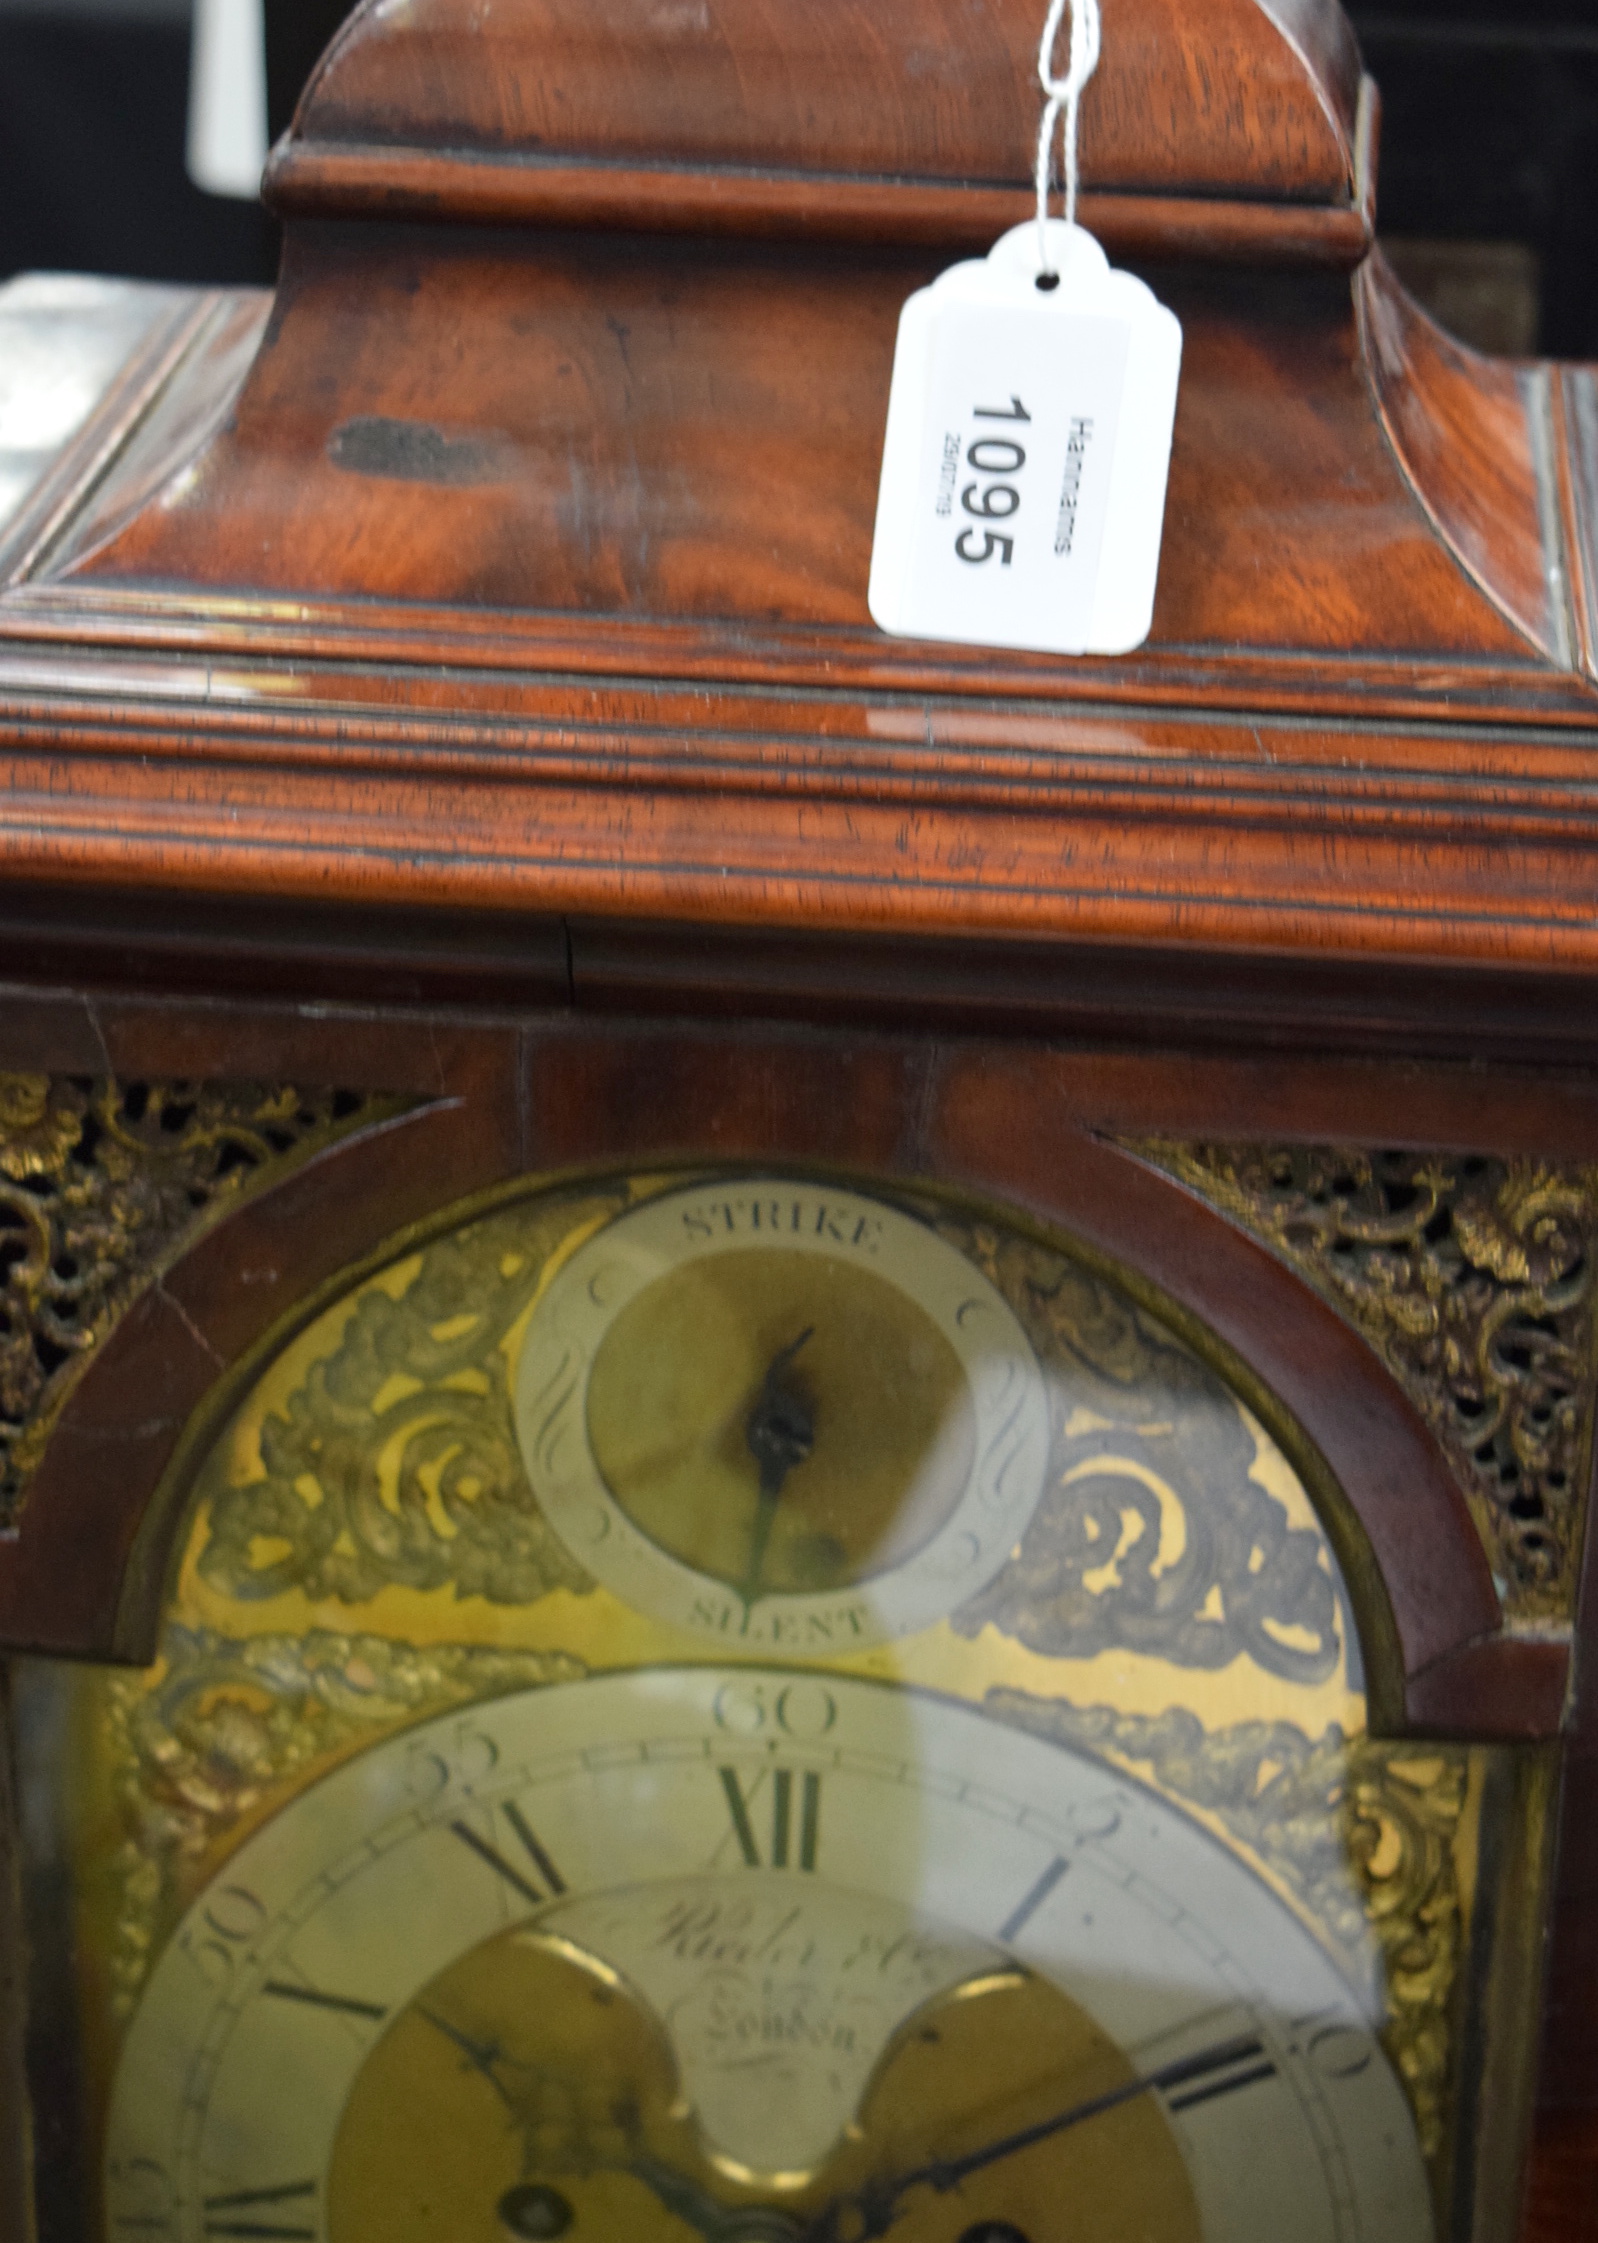 A GEORGE III RIEDER & CO LONDON MAHOGANY BRACKET CLOCK C1780 with silvered dial and brass overlay. - Image 7 of 11